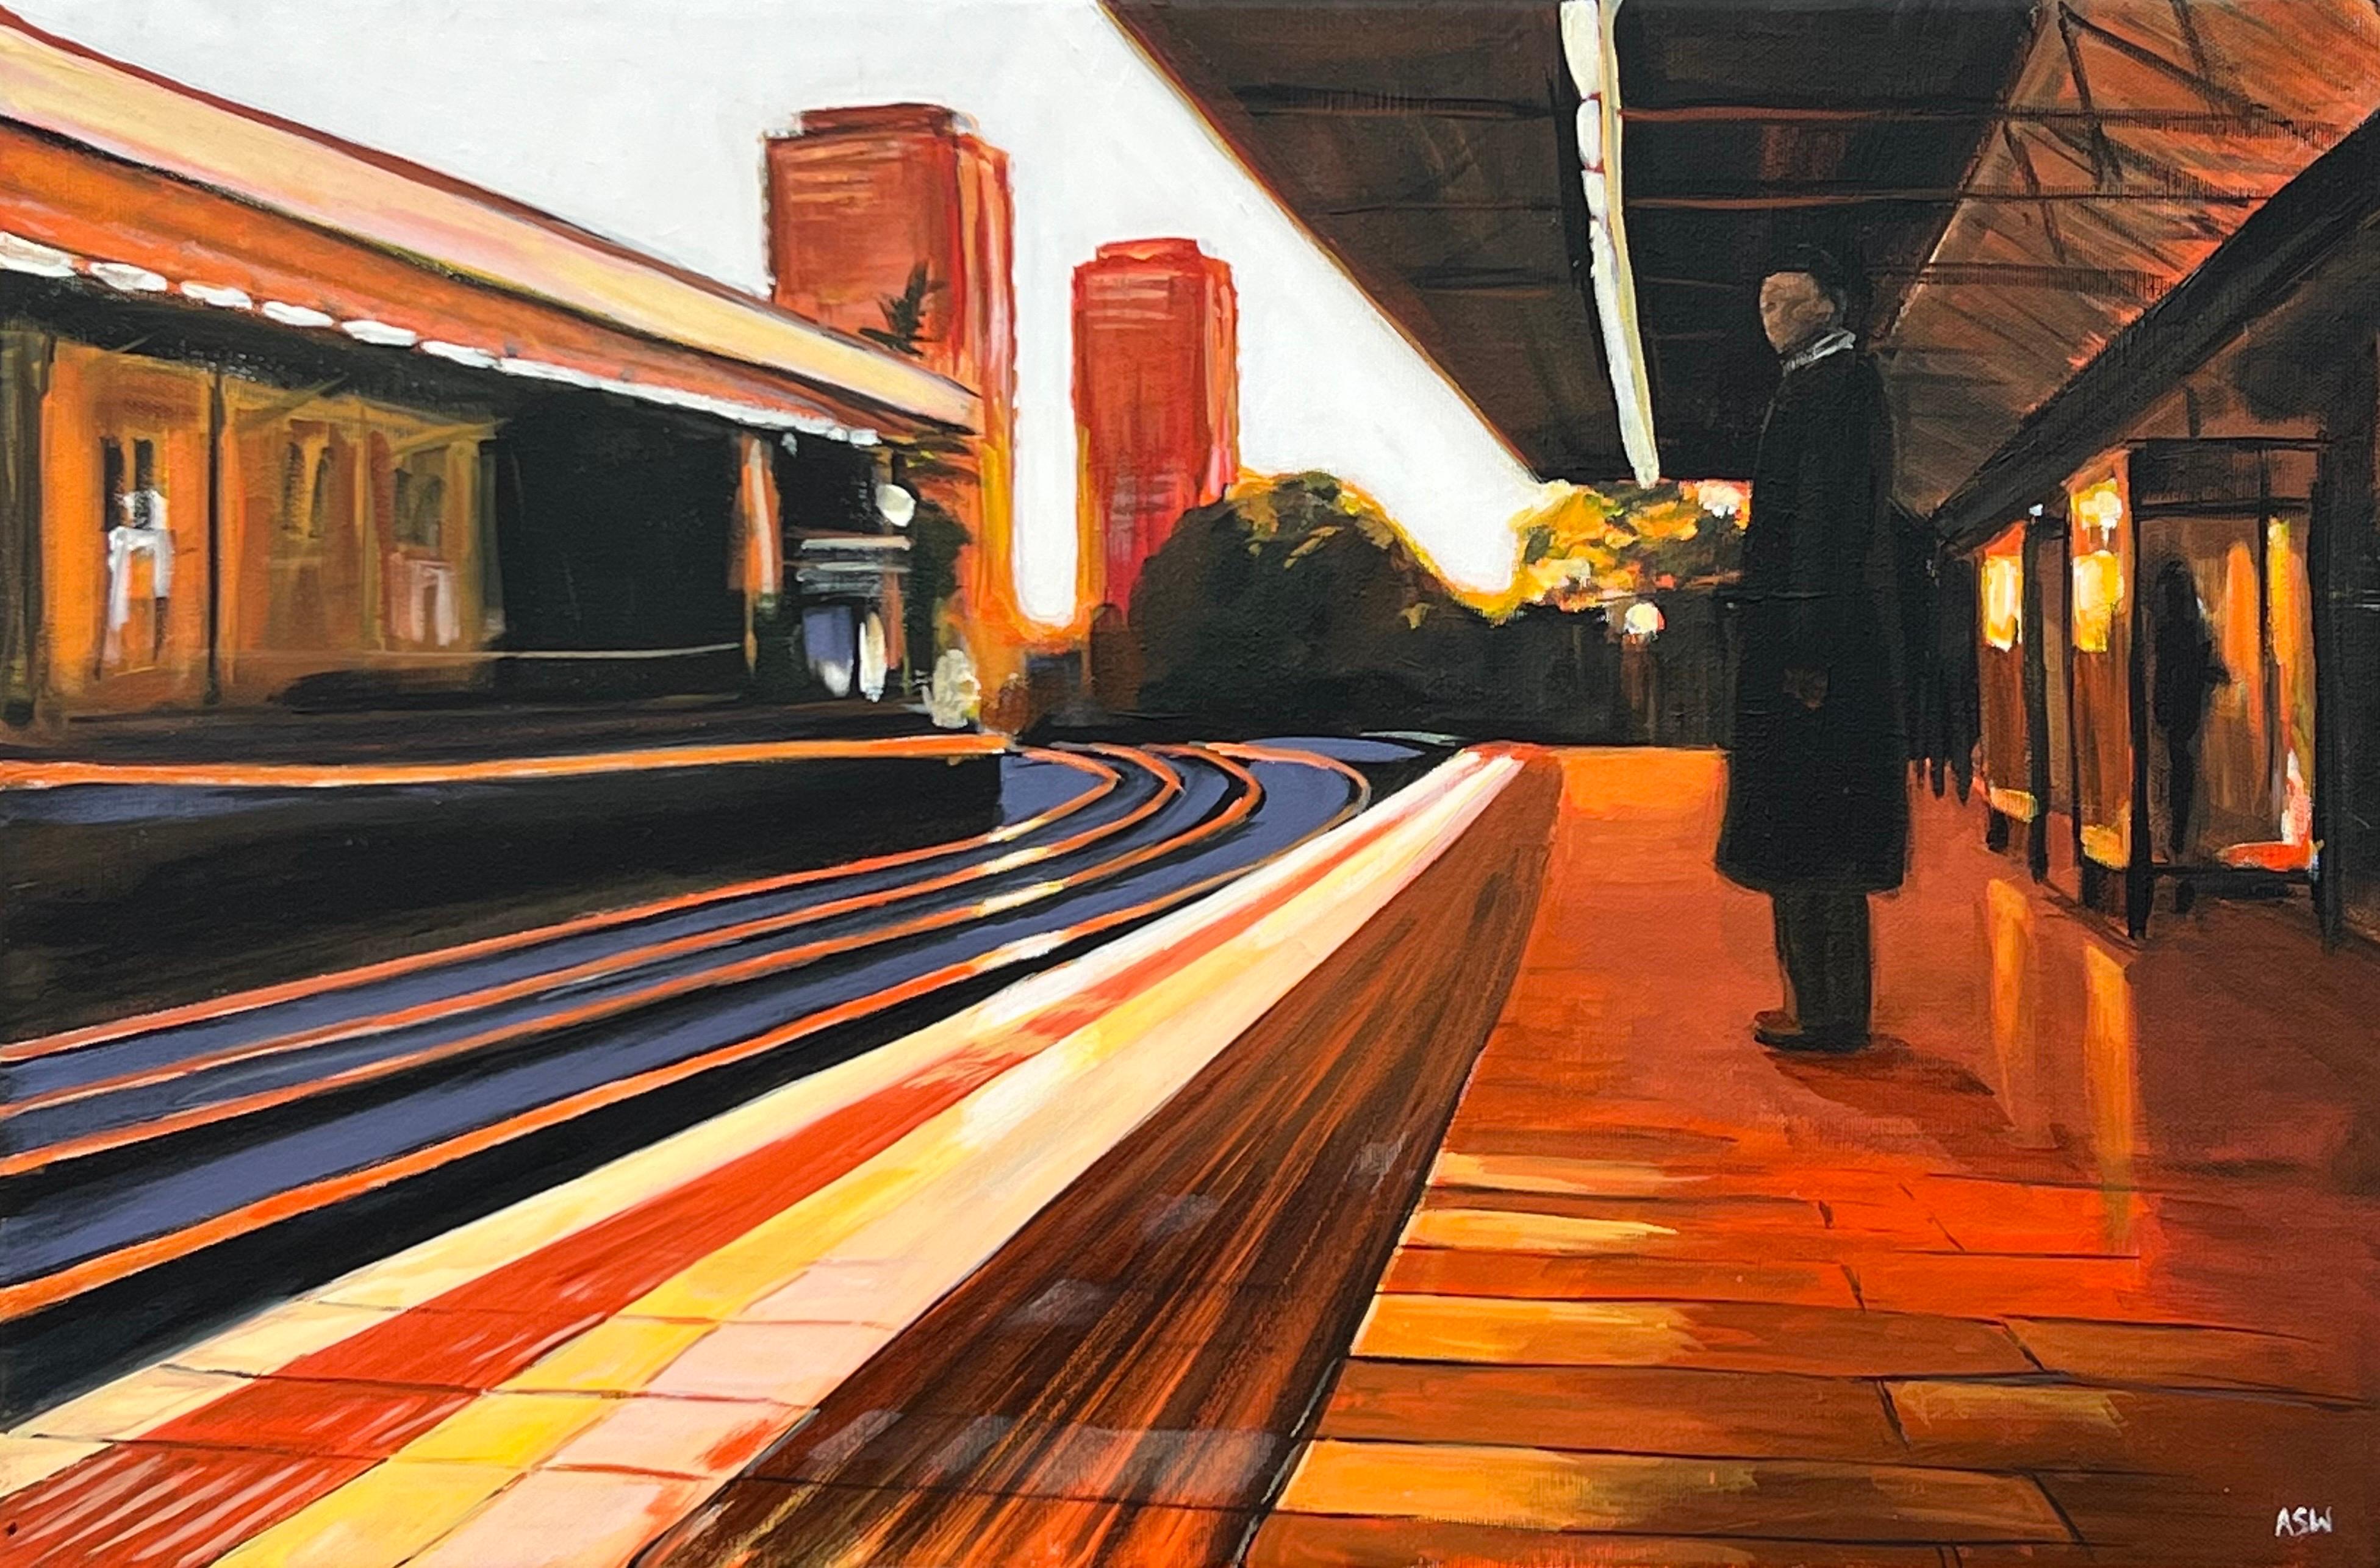 Angela Wakefield Landscape Painting - Painting of Train Station in London England by Contemporary Urban Artist